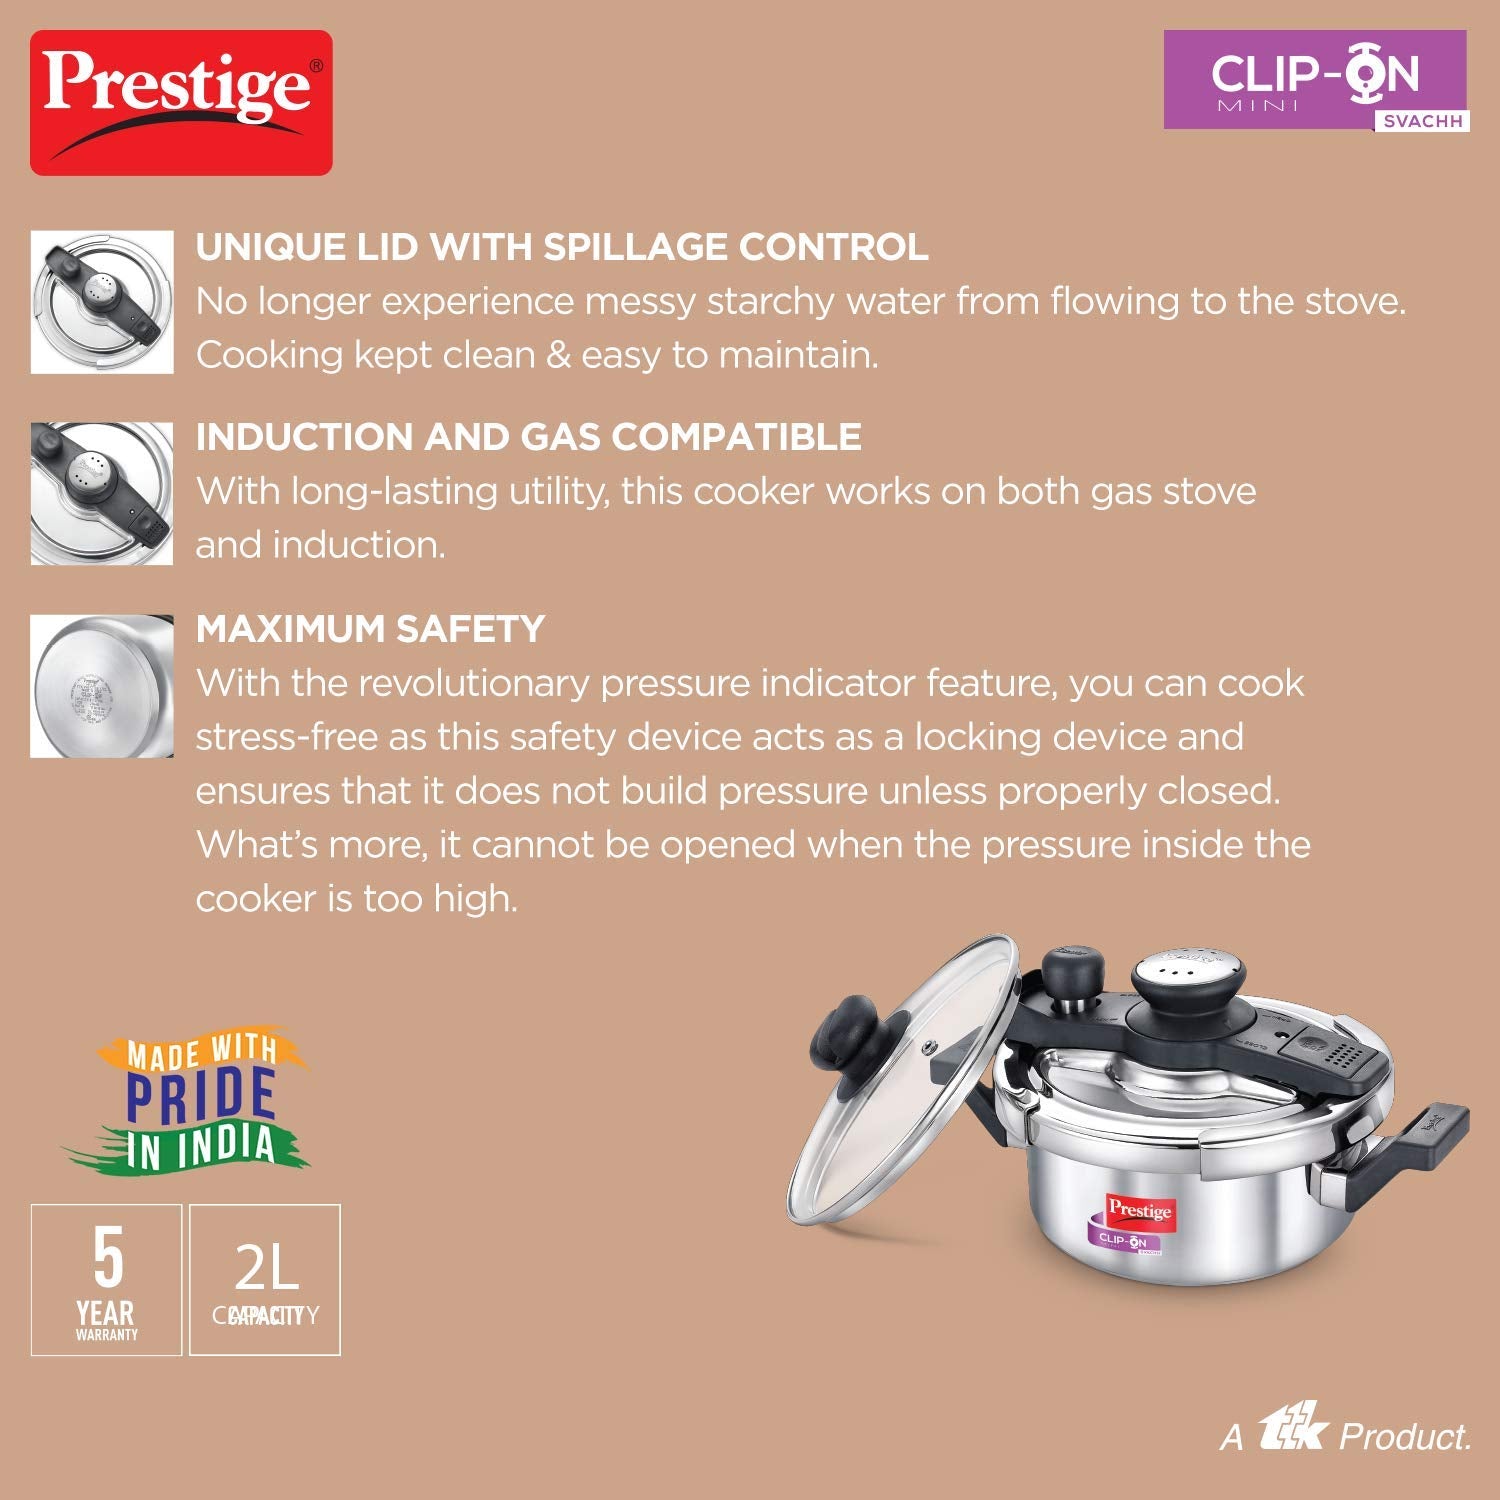 Prestige Svachh, 20237, 2 L, Stainless Steel Pressure Cookers, with de